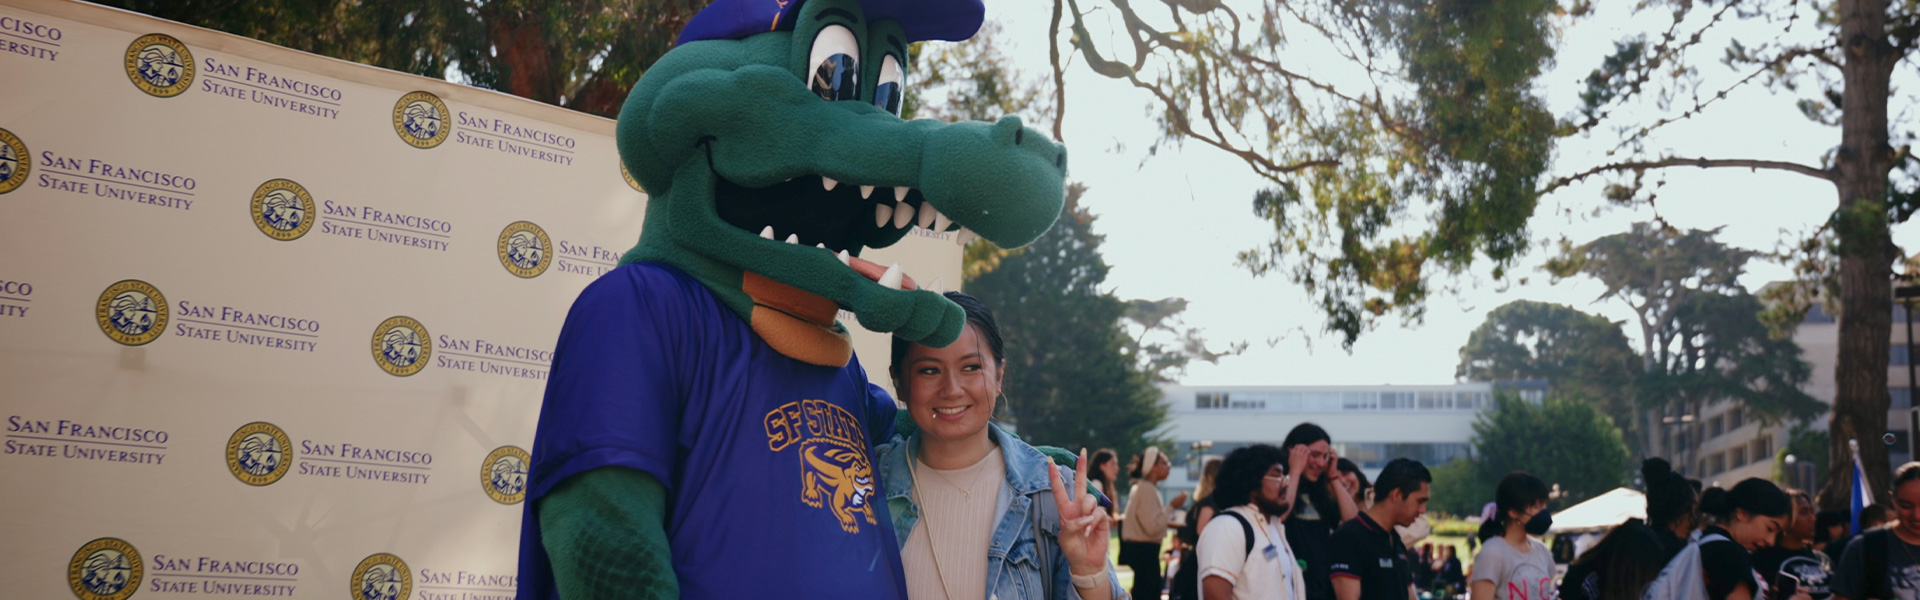 Mascot Alli Gator posing with a smiling student